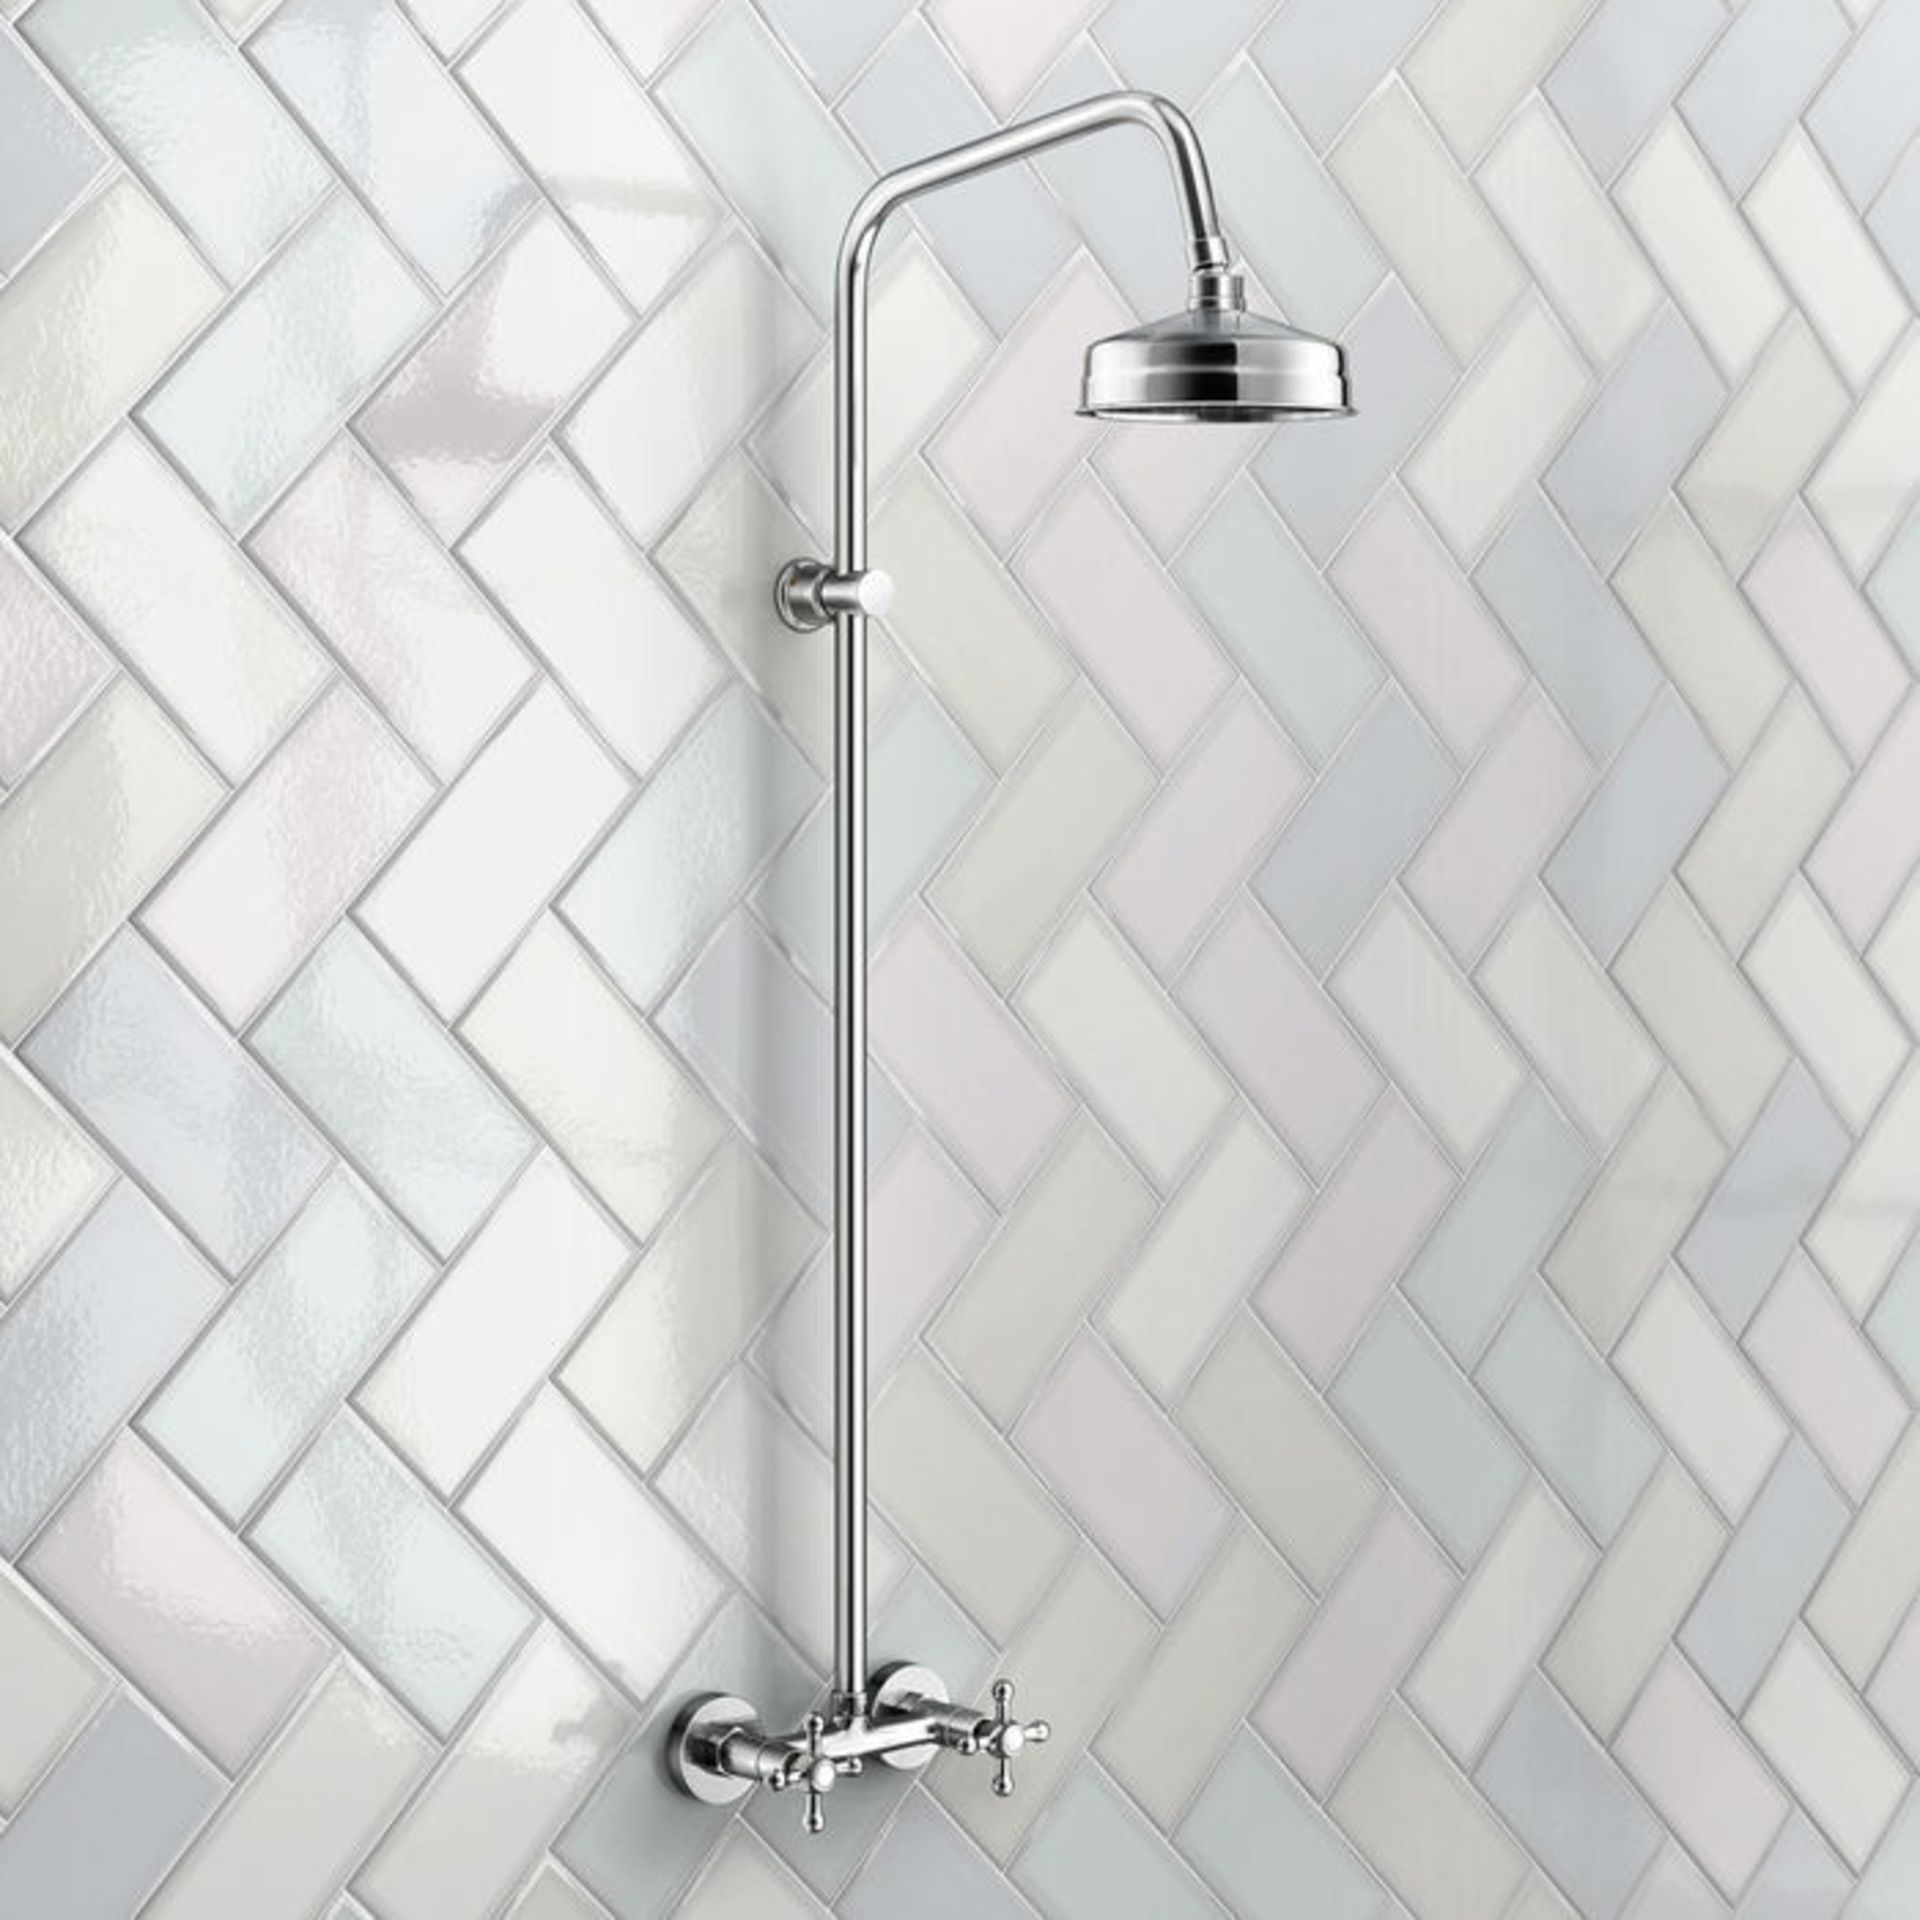 (TS211) Traditional Exposed Shower Medium Head. Exposed design makes for a statement piece - Image 3 of 3